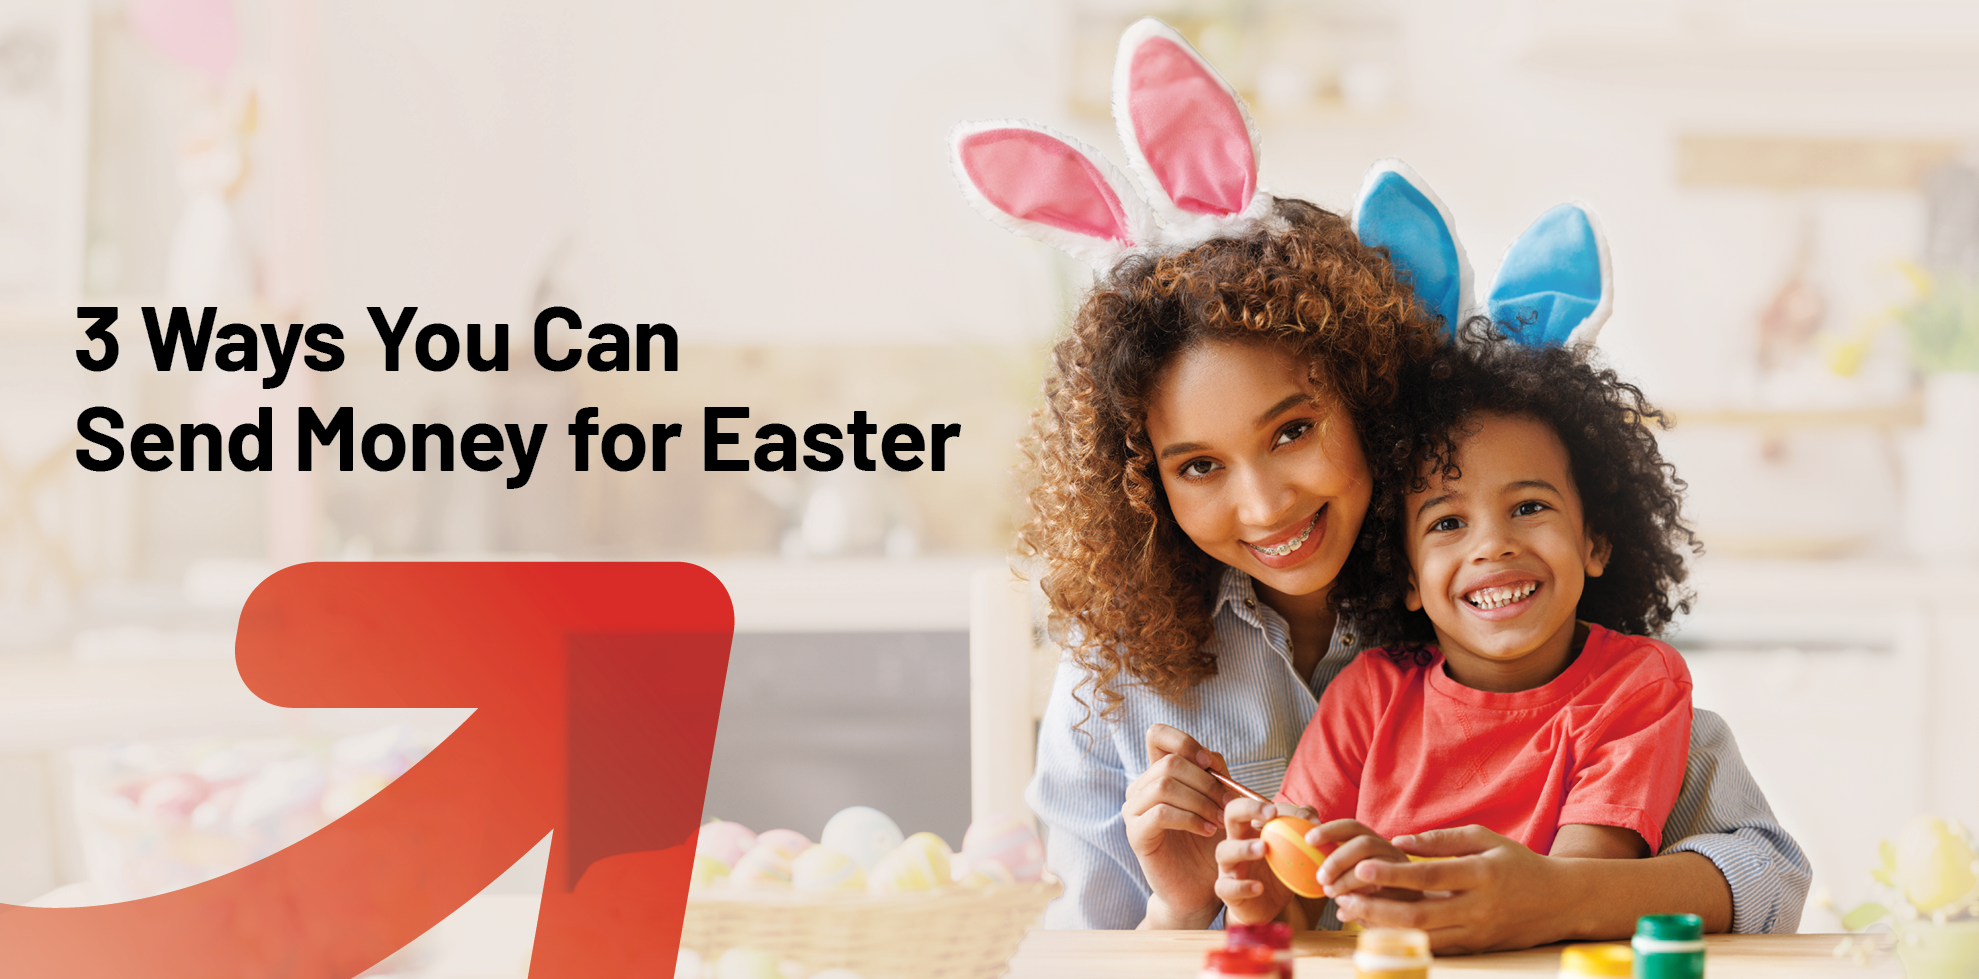 3 Ways You Can Send Money for Easter